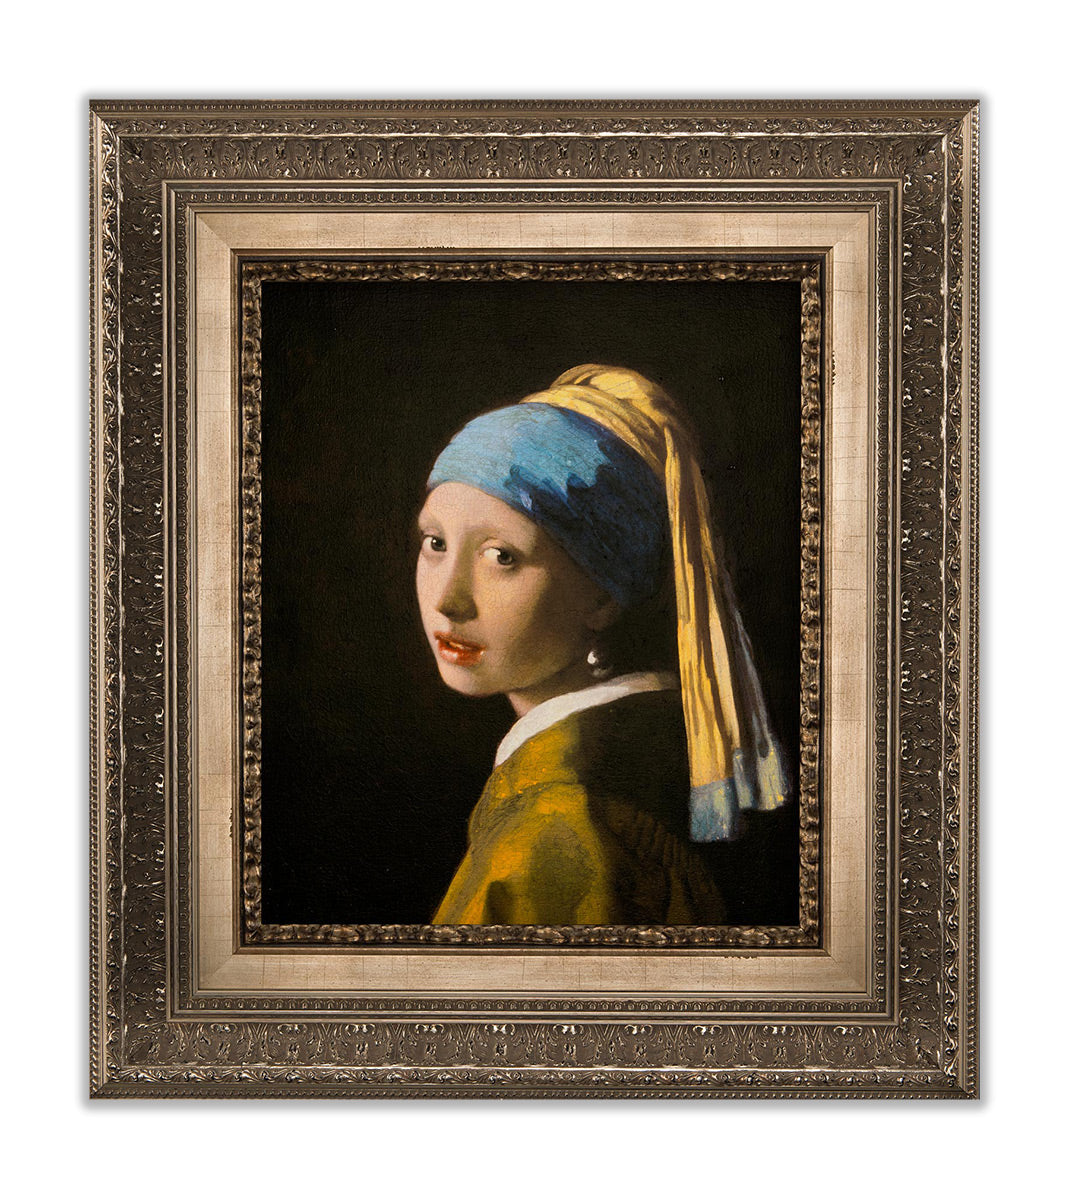 EXHIBITION ON SCREEN: Girl with a Pearl Earring - YouTube